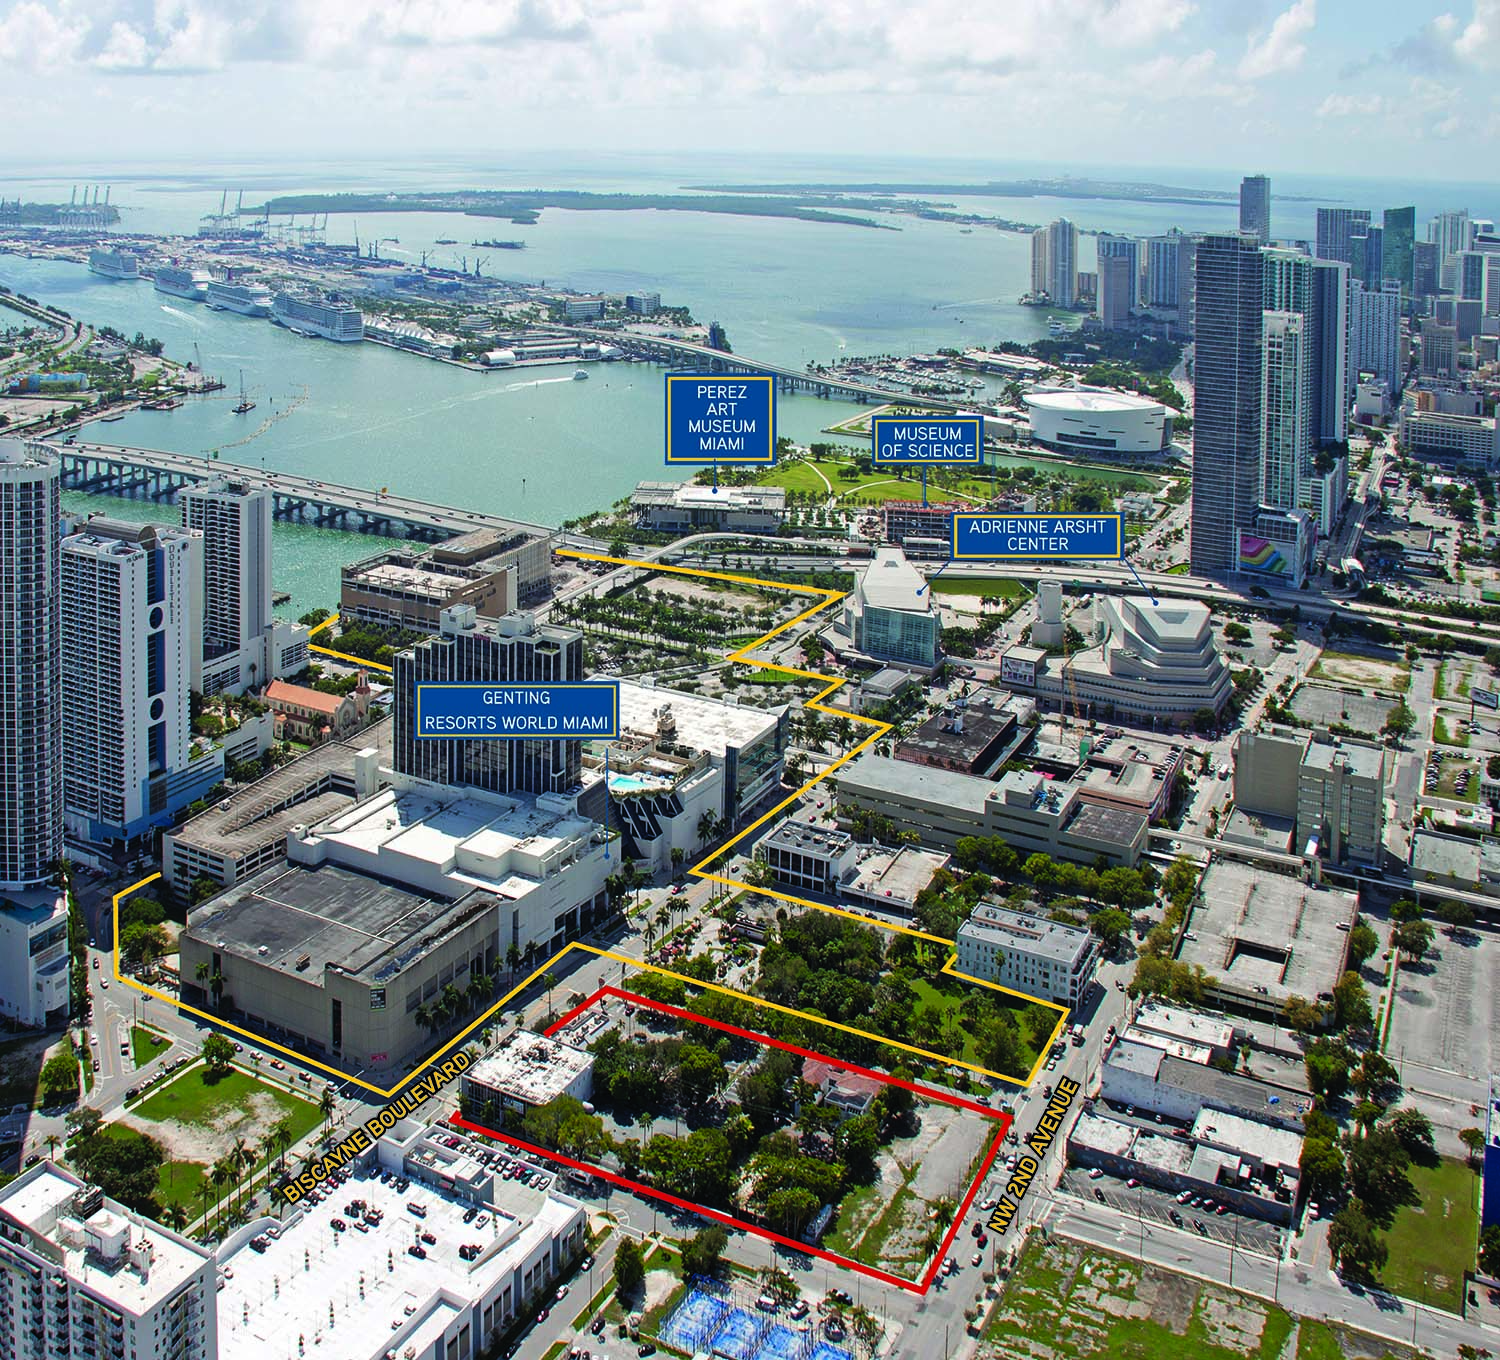 Avison Young closes $105M sale of Biscayne Place, a full city block spanning ±3.04 acres for major residential, mixed-use development near Miami’s Arts & Entertainment District